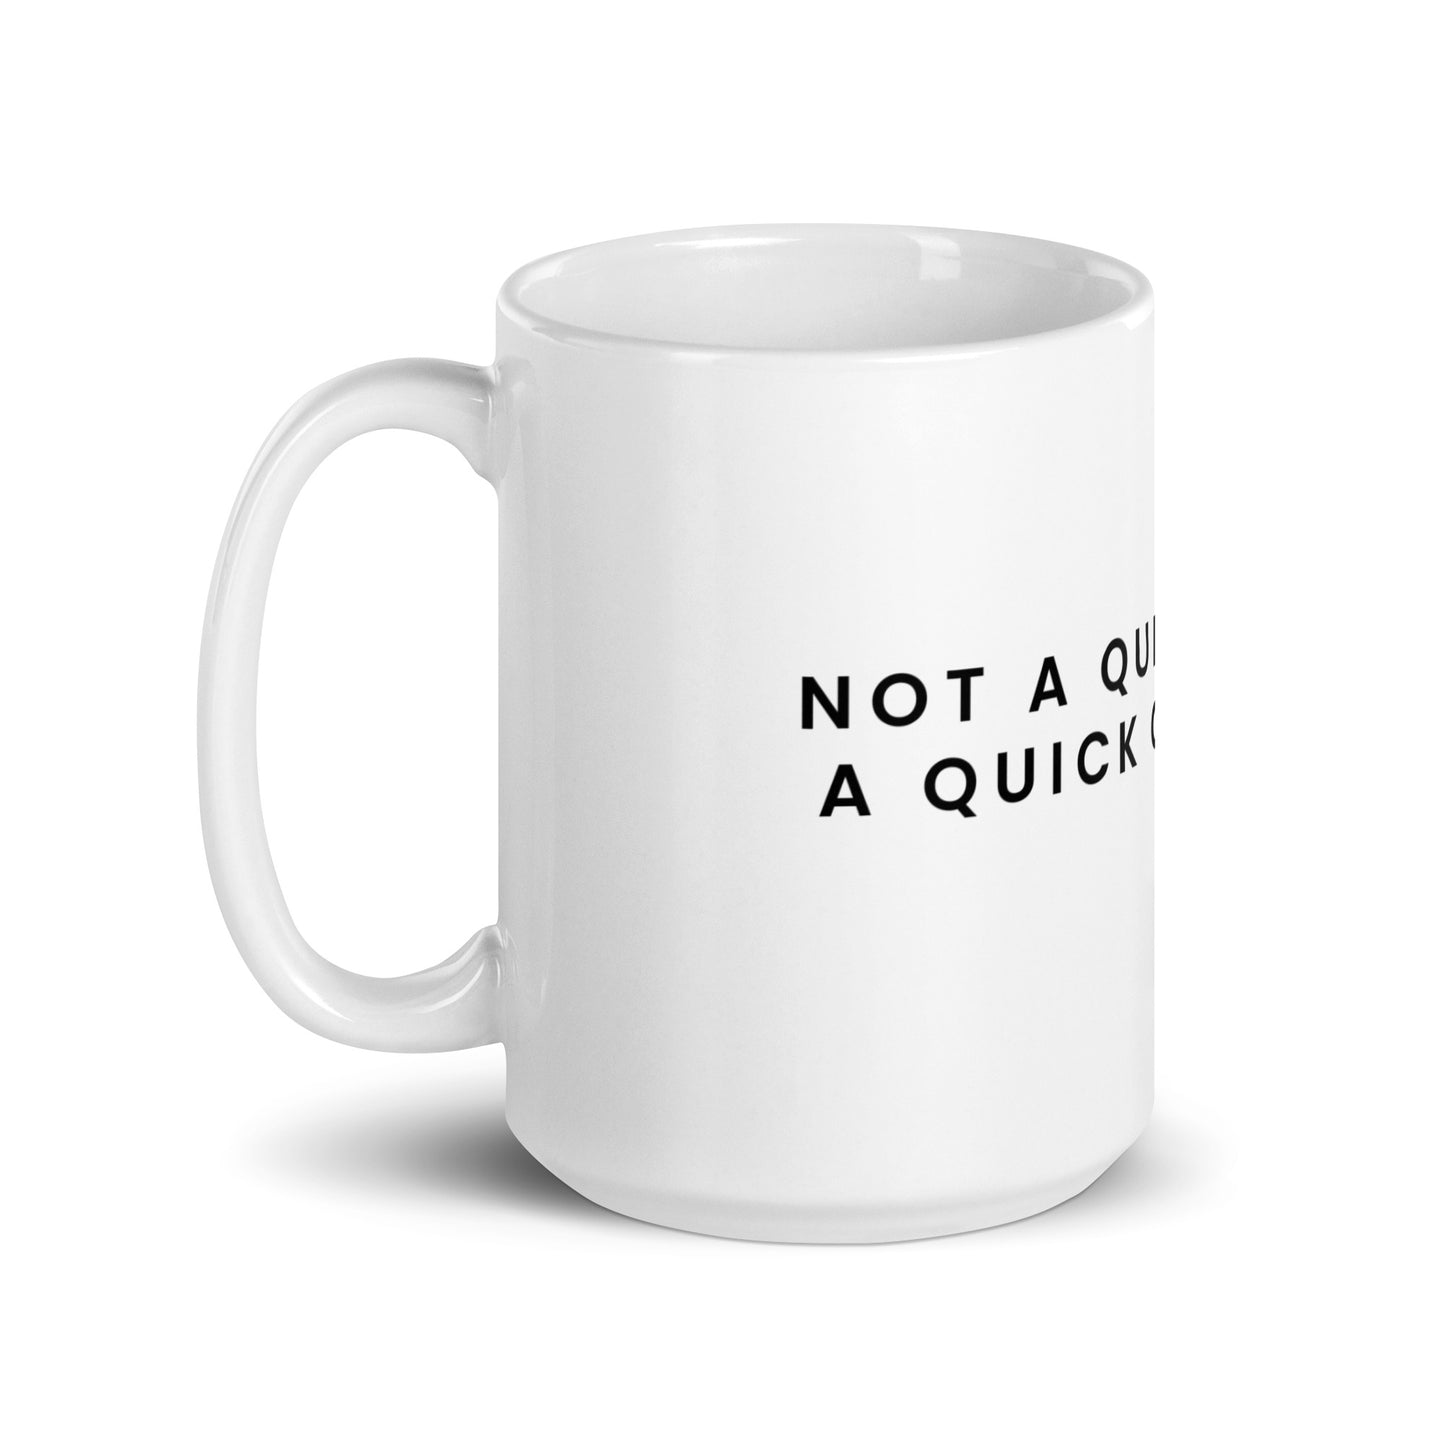 "Not a Question, but a Comment..." White Glossy Mug